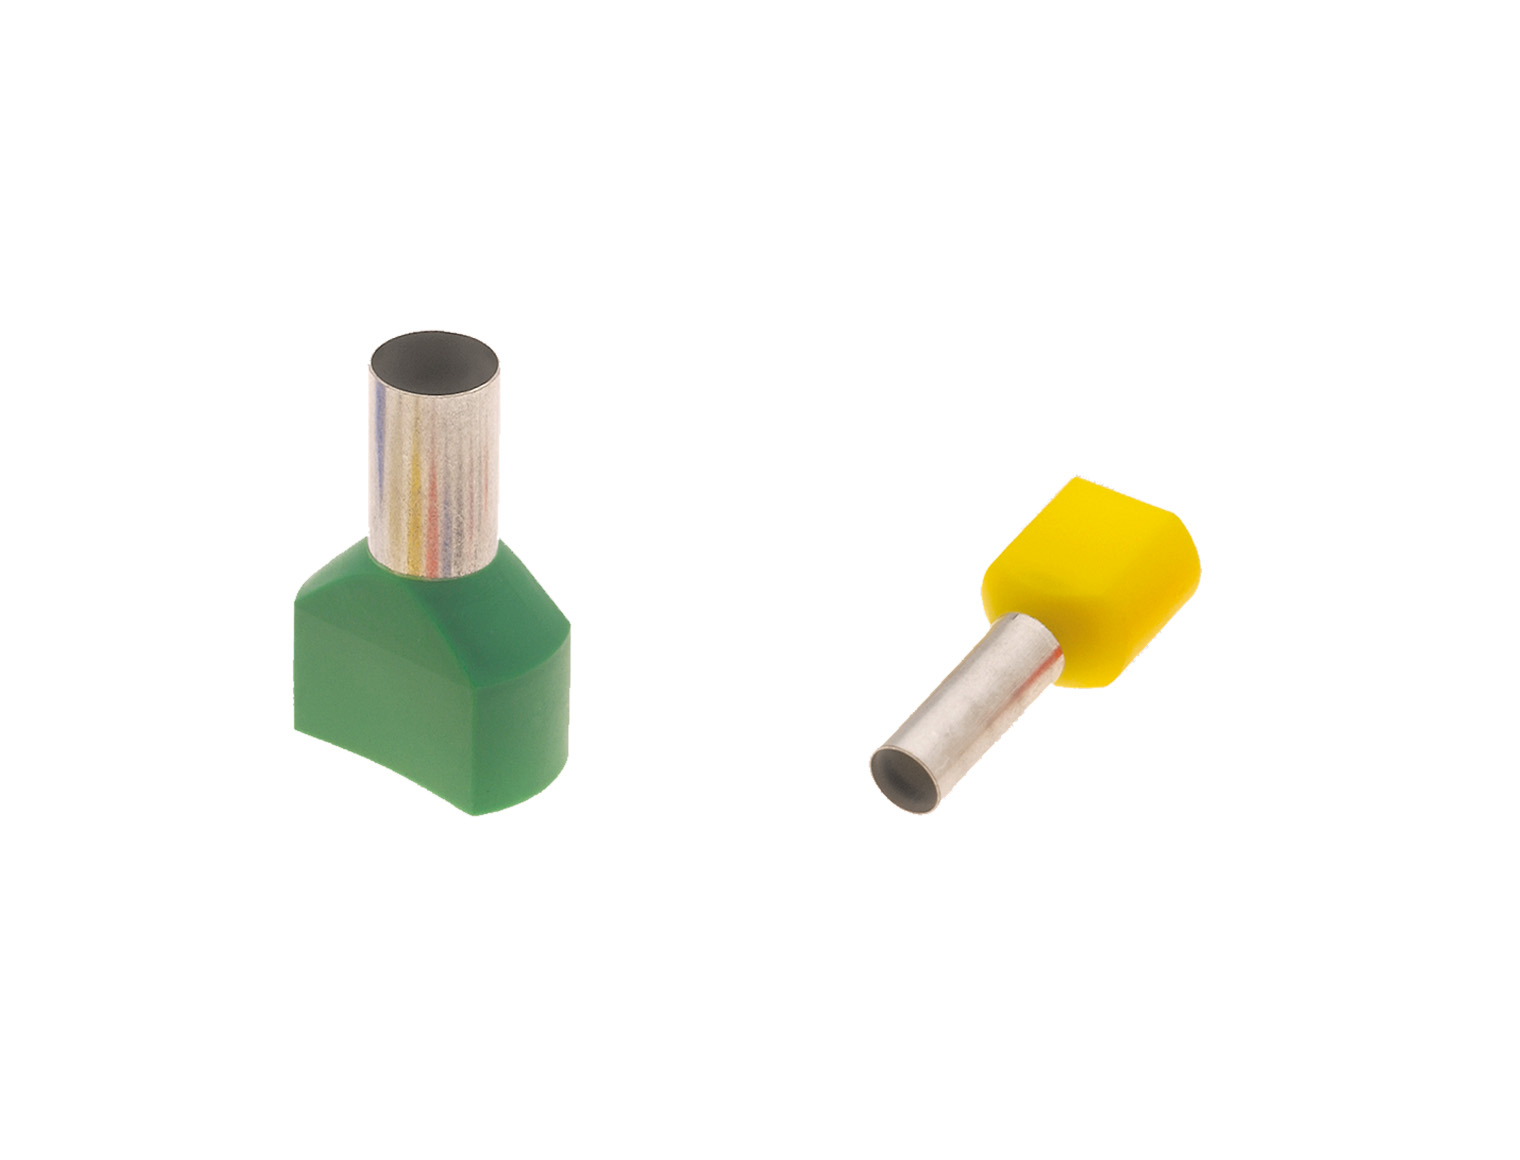 DUO core end sleeves - insulated, for 2 conductors